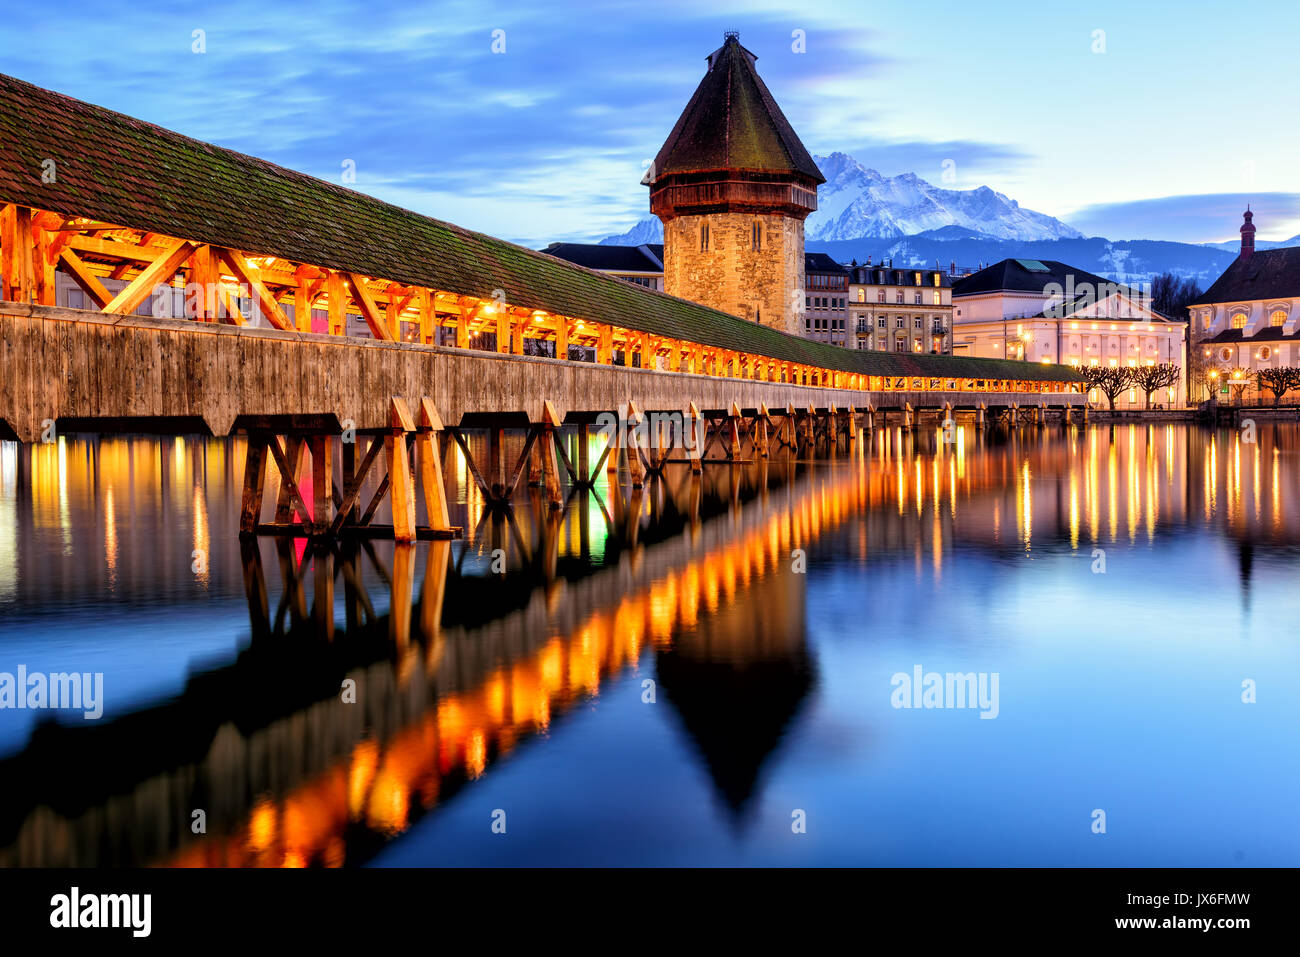 Wooden Chapel Bridge, Water Tower and Mount Pilatus in the Old Town of Lucerne, Switzerland, in the late evening light Stock Photo